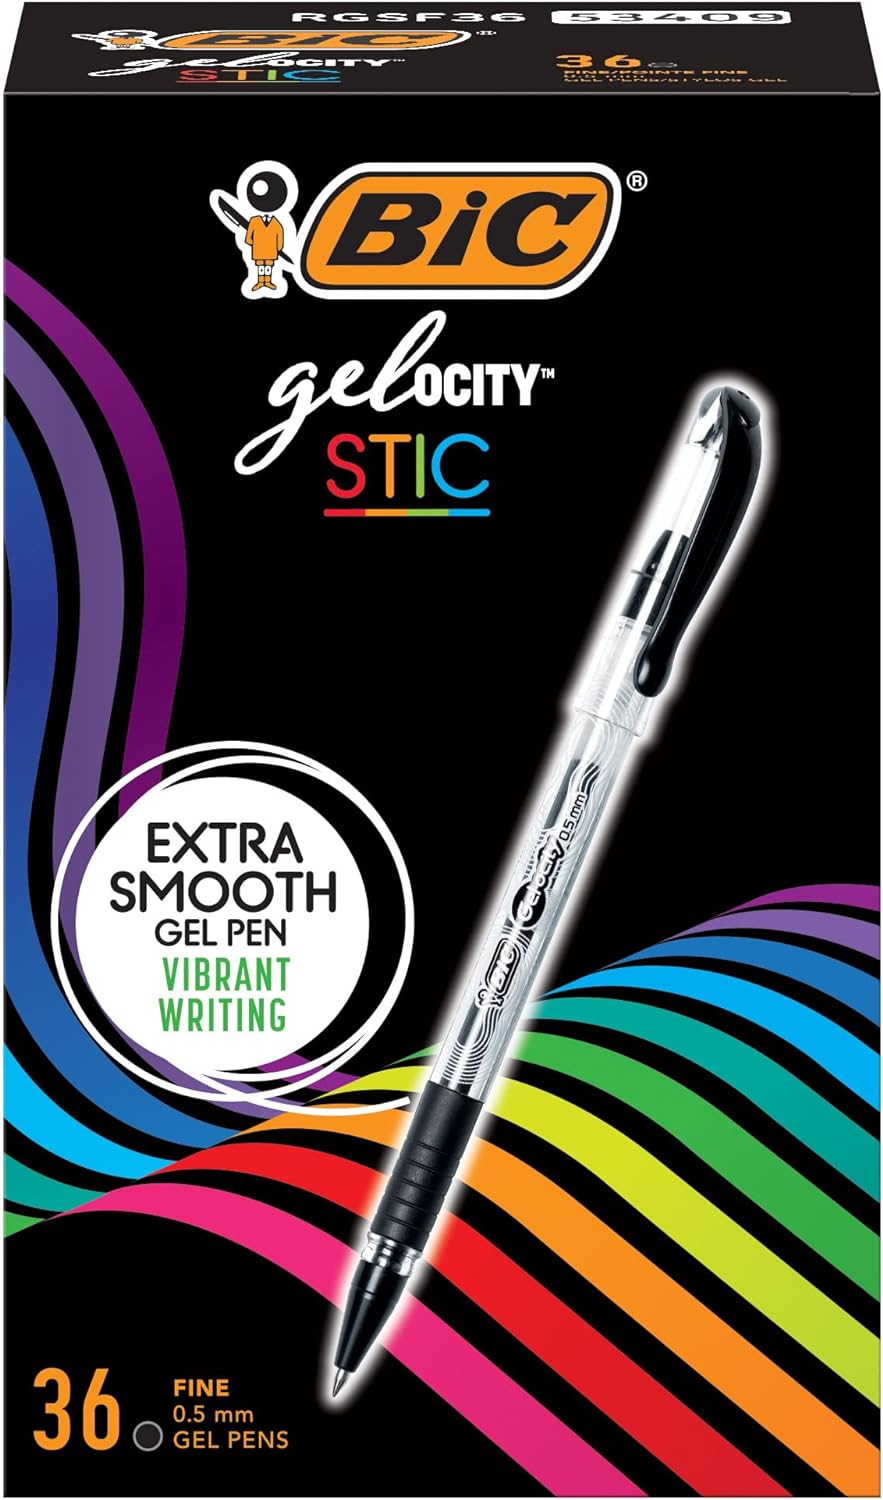 BIC Gel-ocity Smooth Stic Gel Pen, Fine Point (0.5mm), Black Ink, 36-Count, Vibrant and Smooth Gel Ink, School & Office Supplies